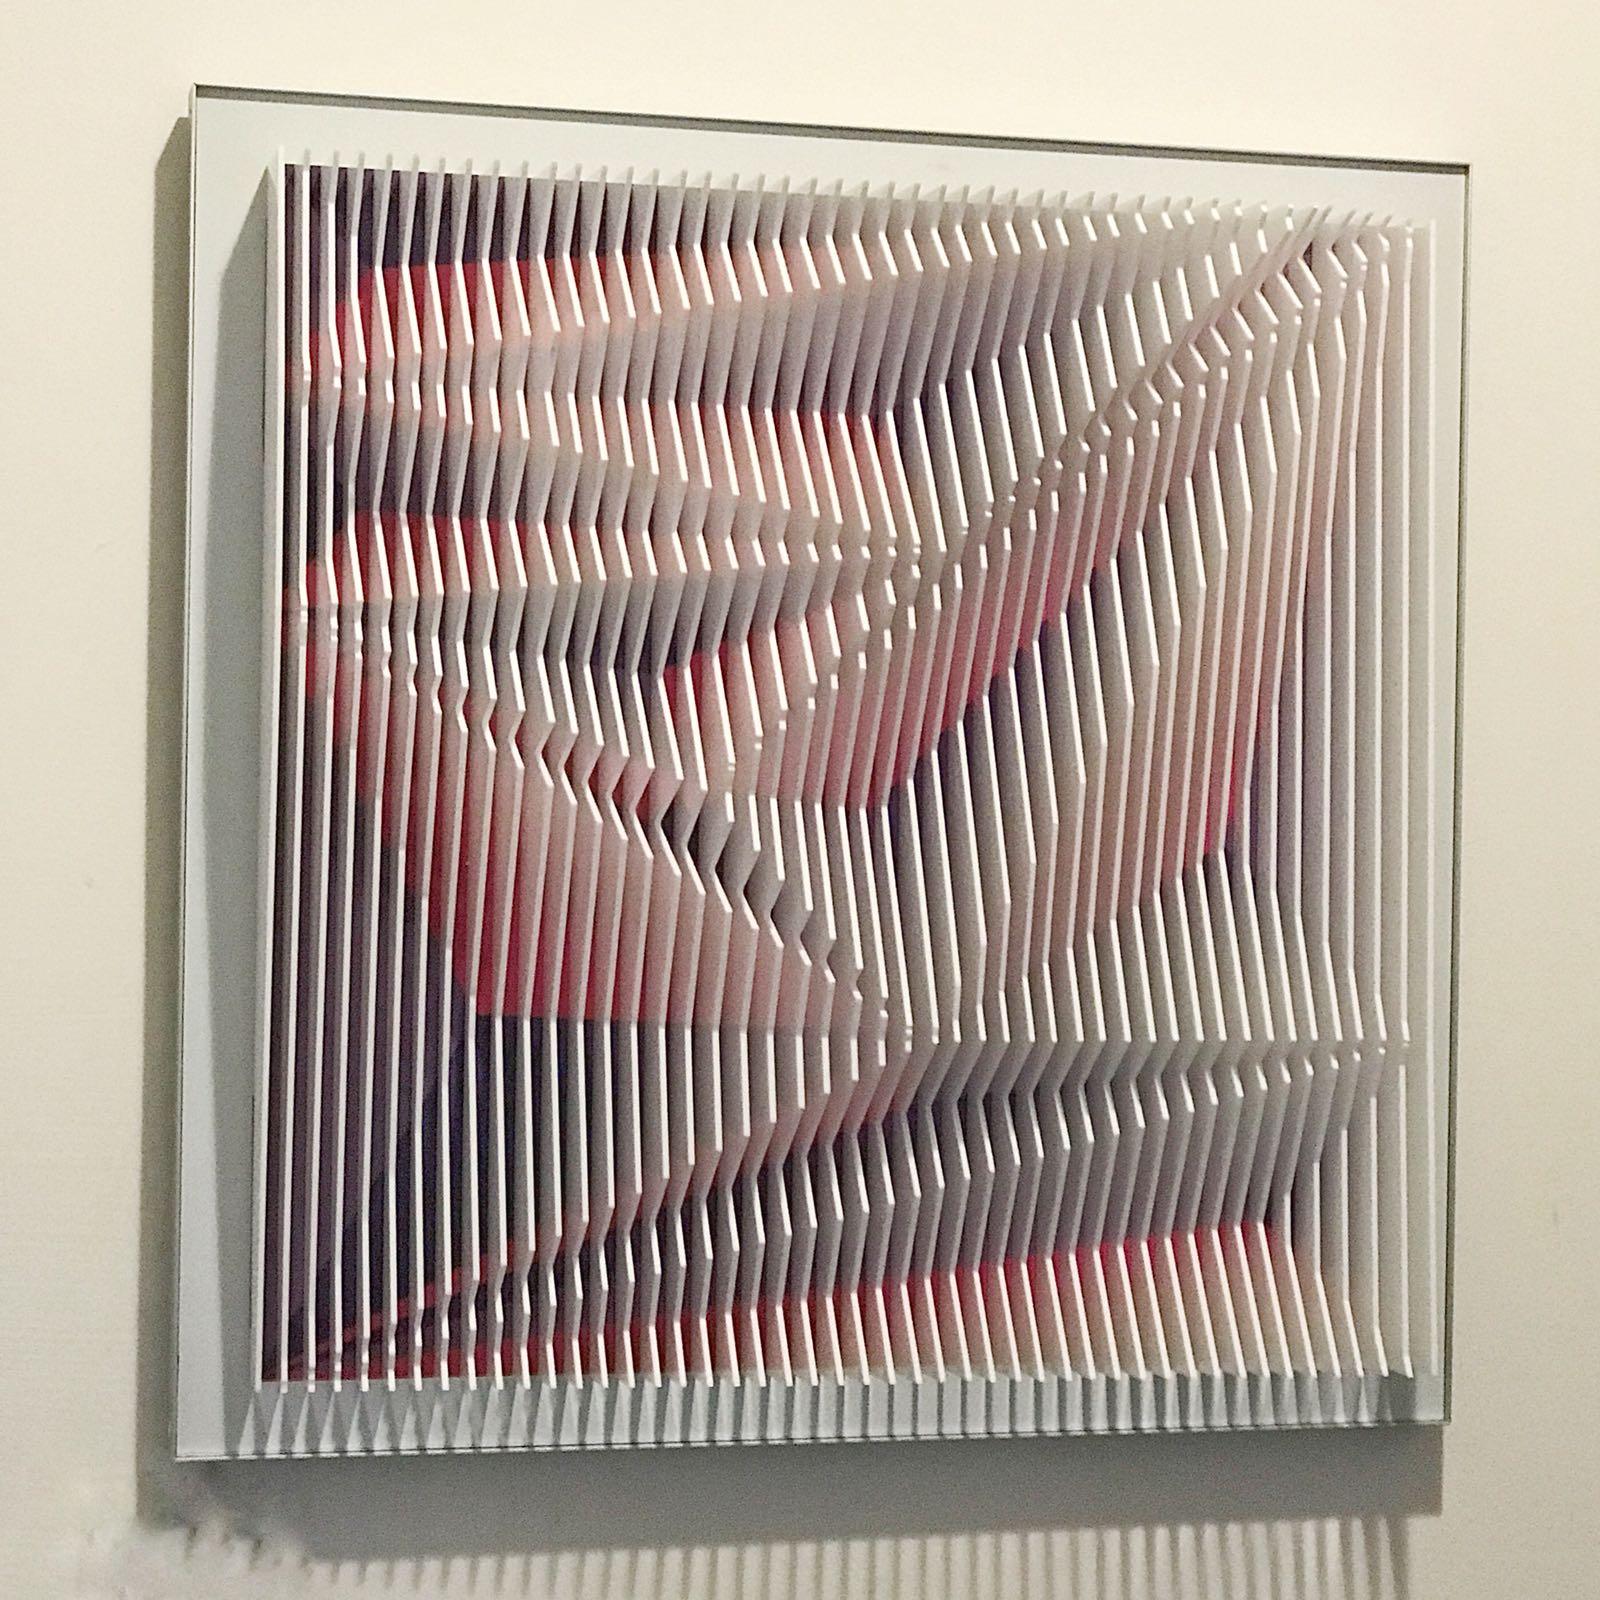 This unique piece by Margulis is from his latest body of works and is part of an edition of 9. After assembling the Plexiglas sheets onto the aluminium core, he uses acrylic paints to cover some the front of the sheets (video is available upon